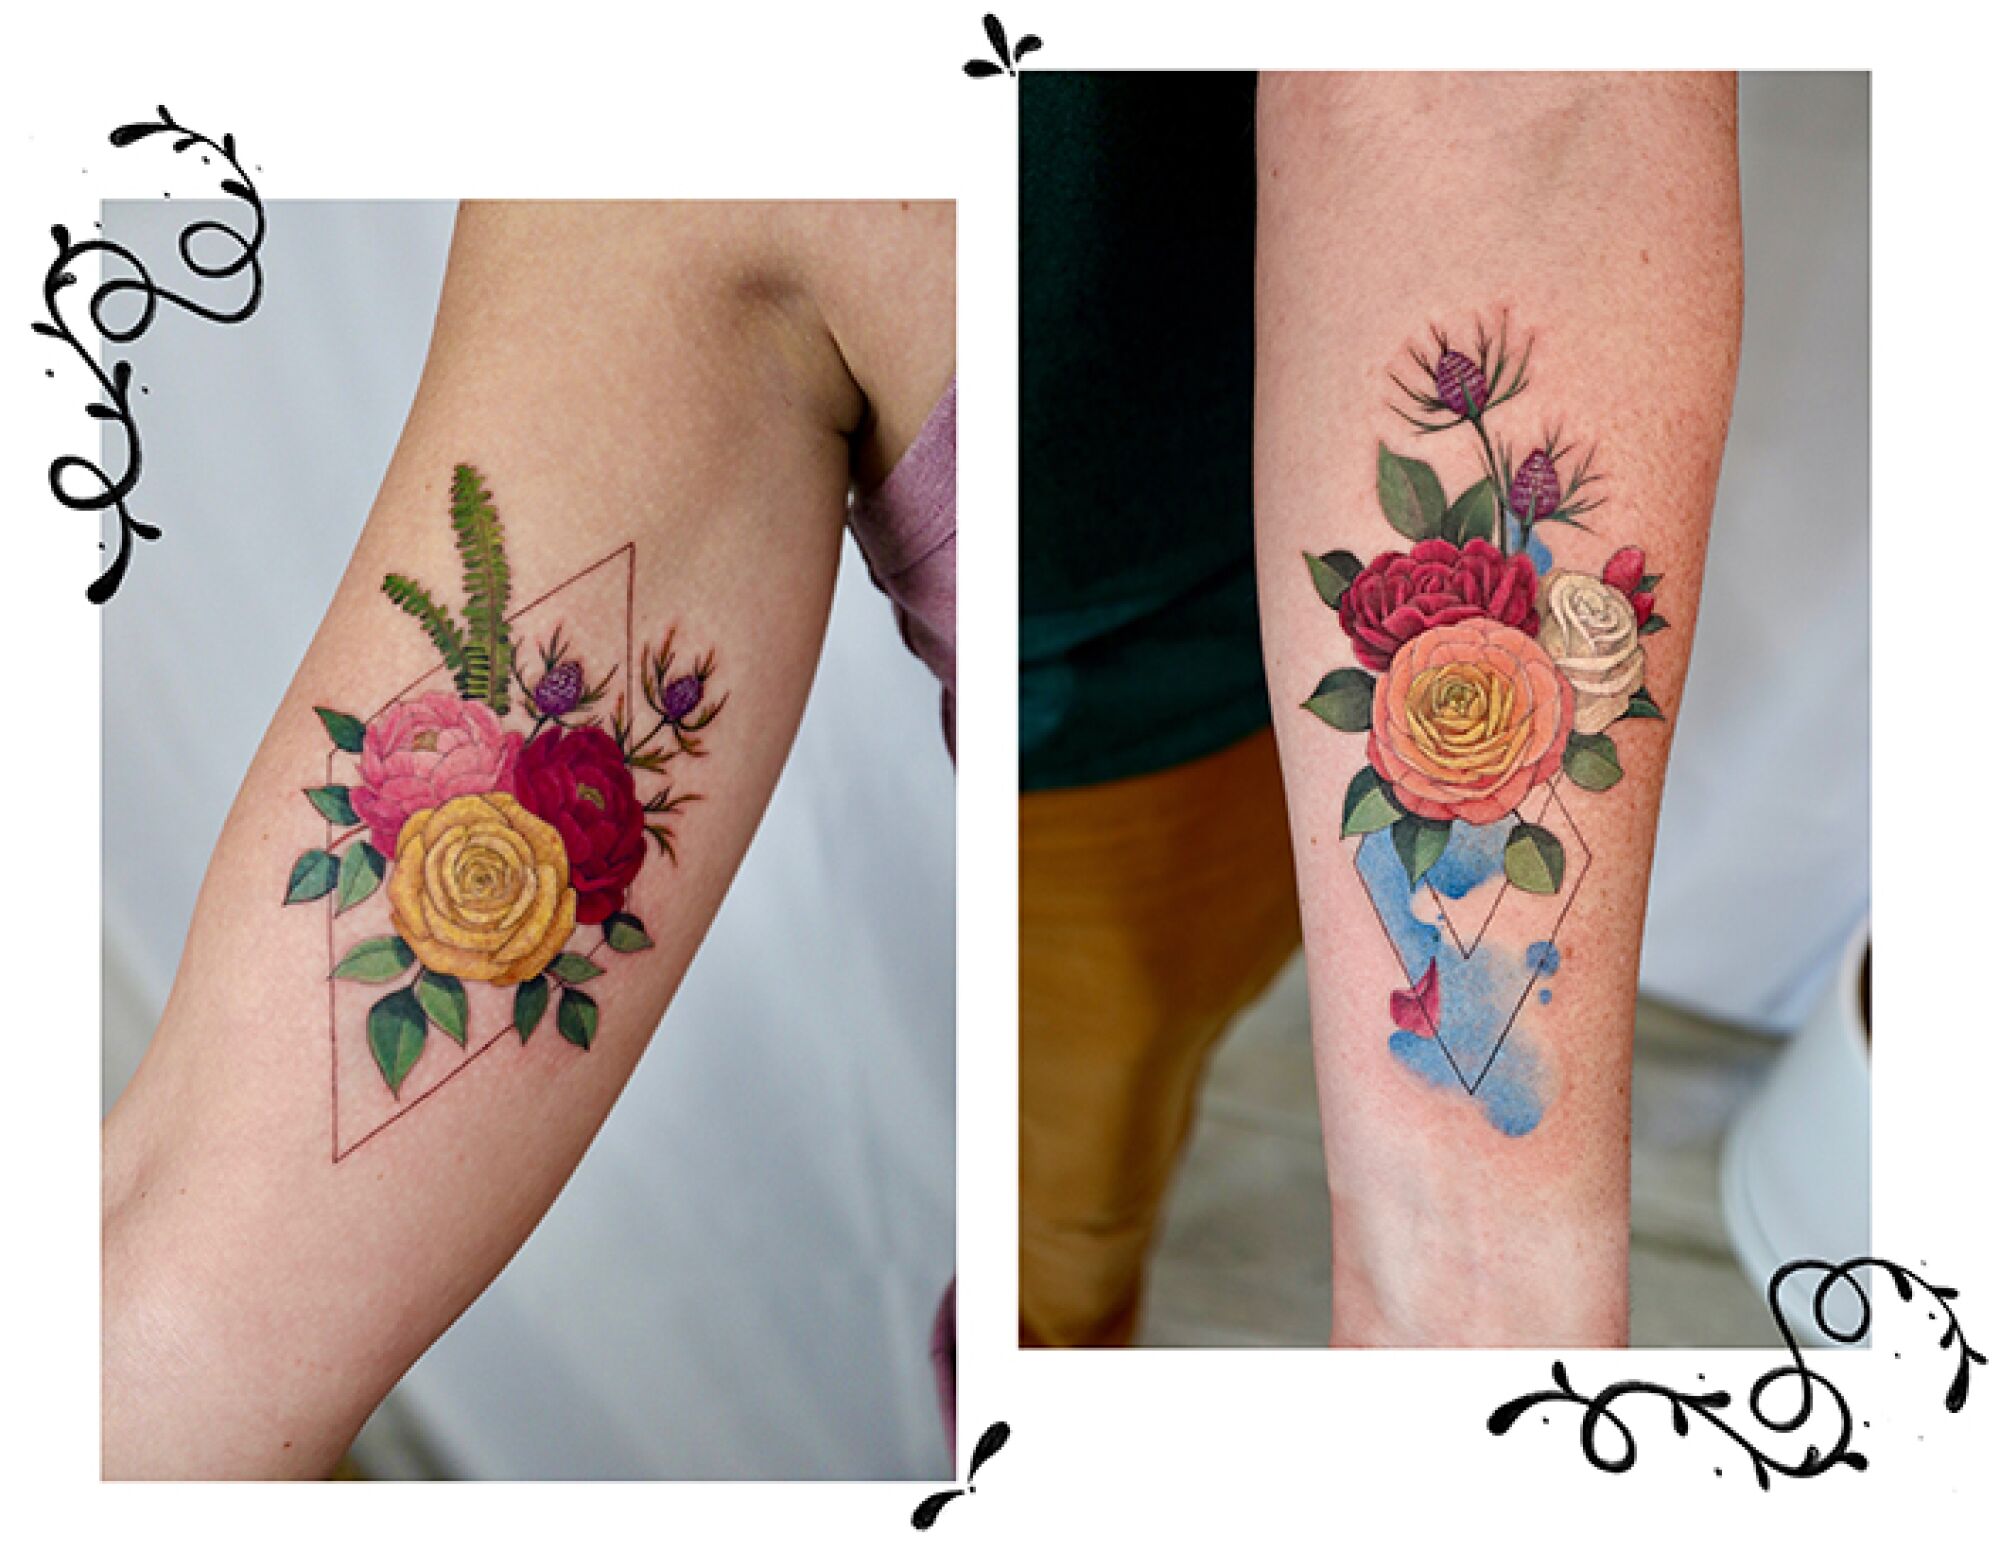 Best plant tattoos by Los Angeles tattoo artists - Los Angeles Times